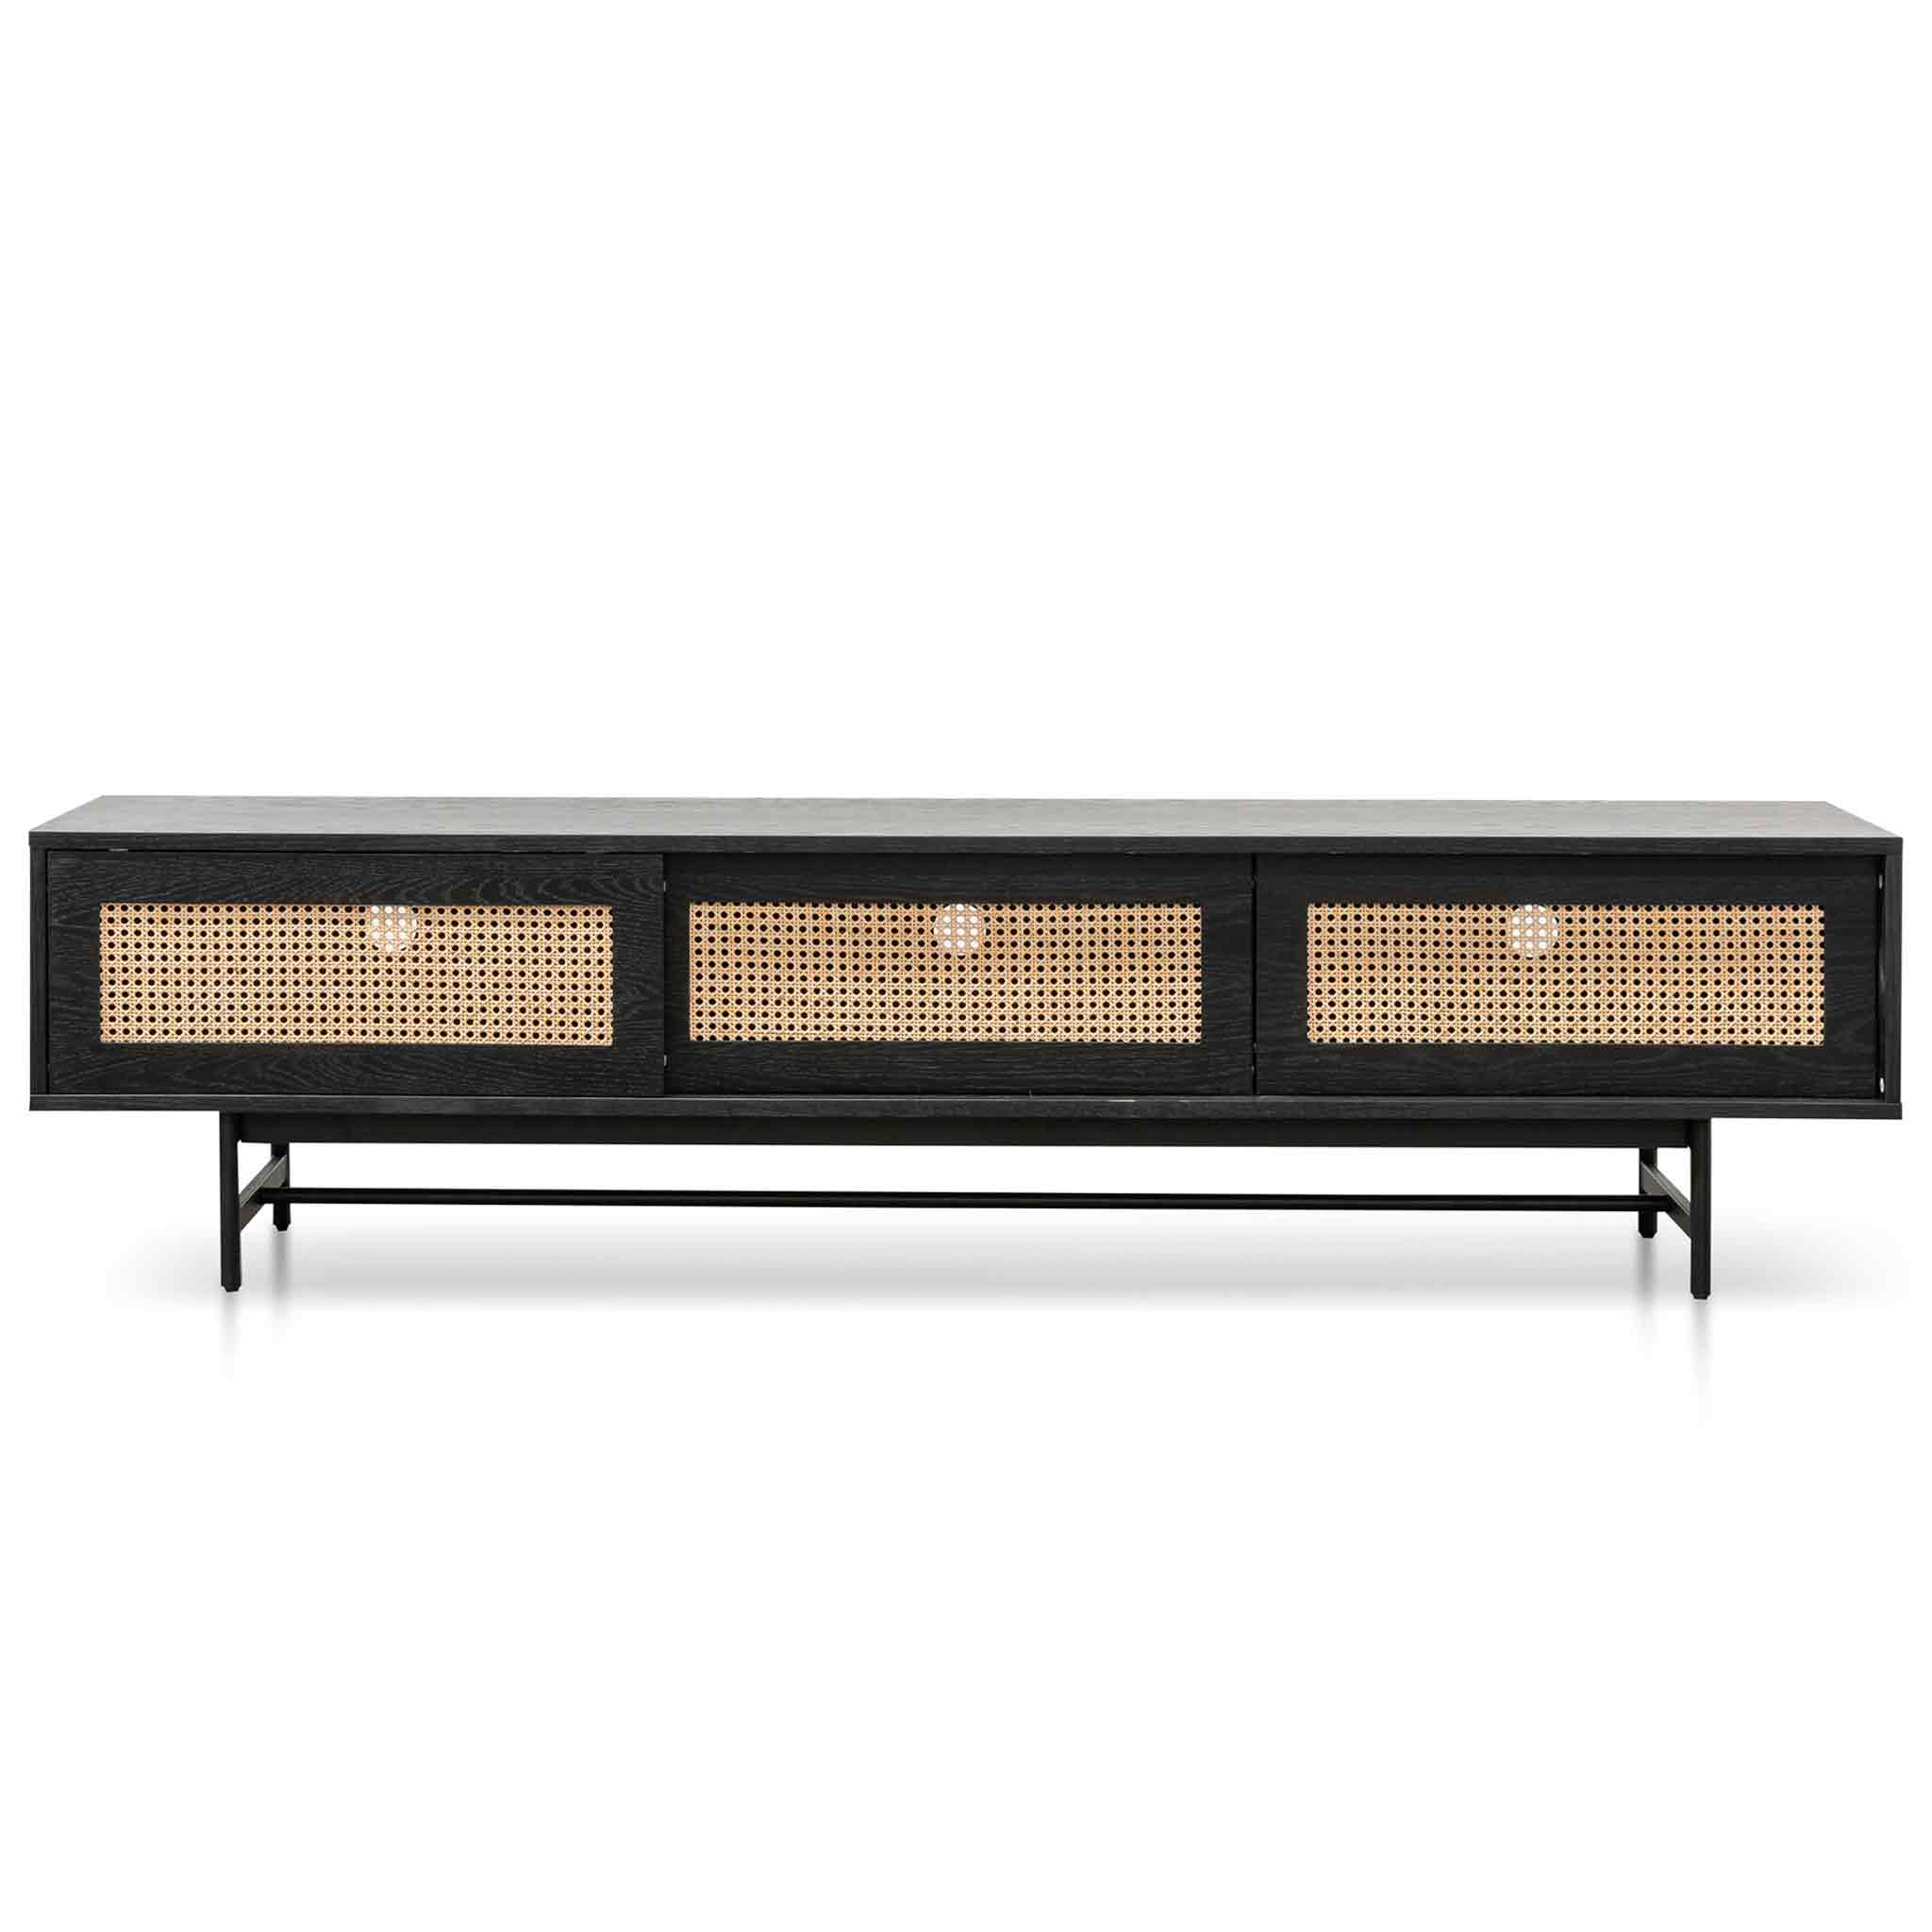 Delaney TV Stand - Black with Natural Rattan Doors - TV Units